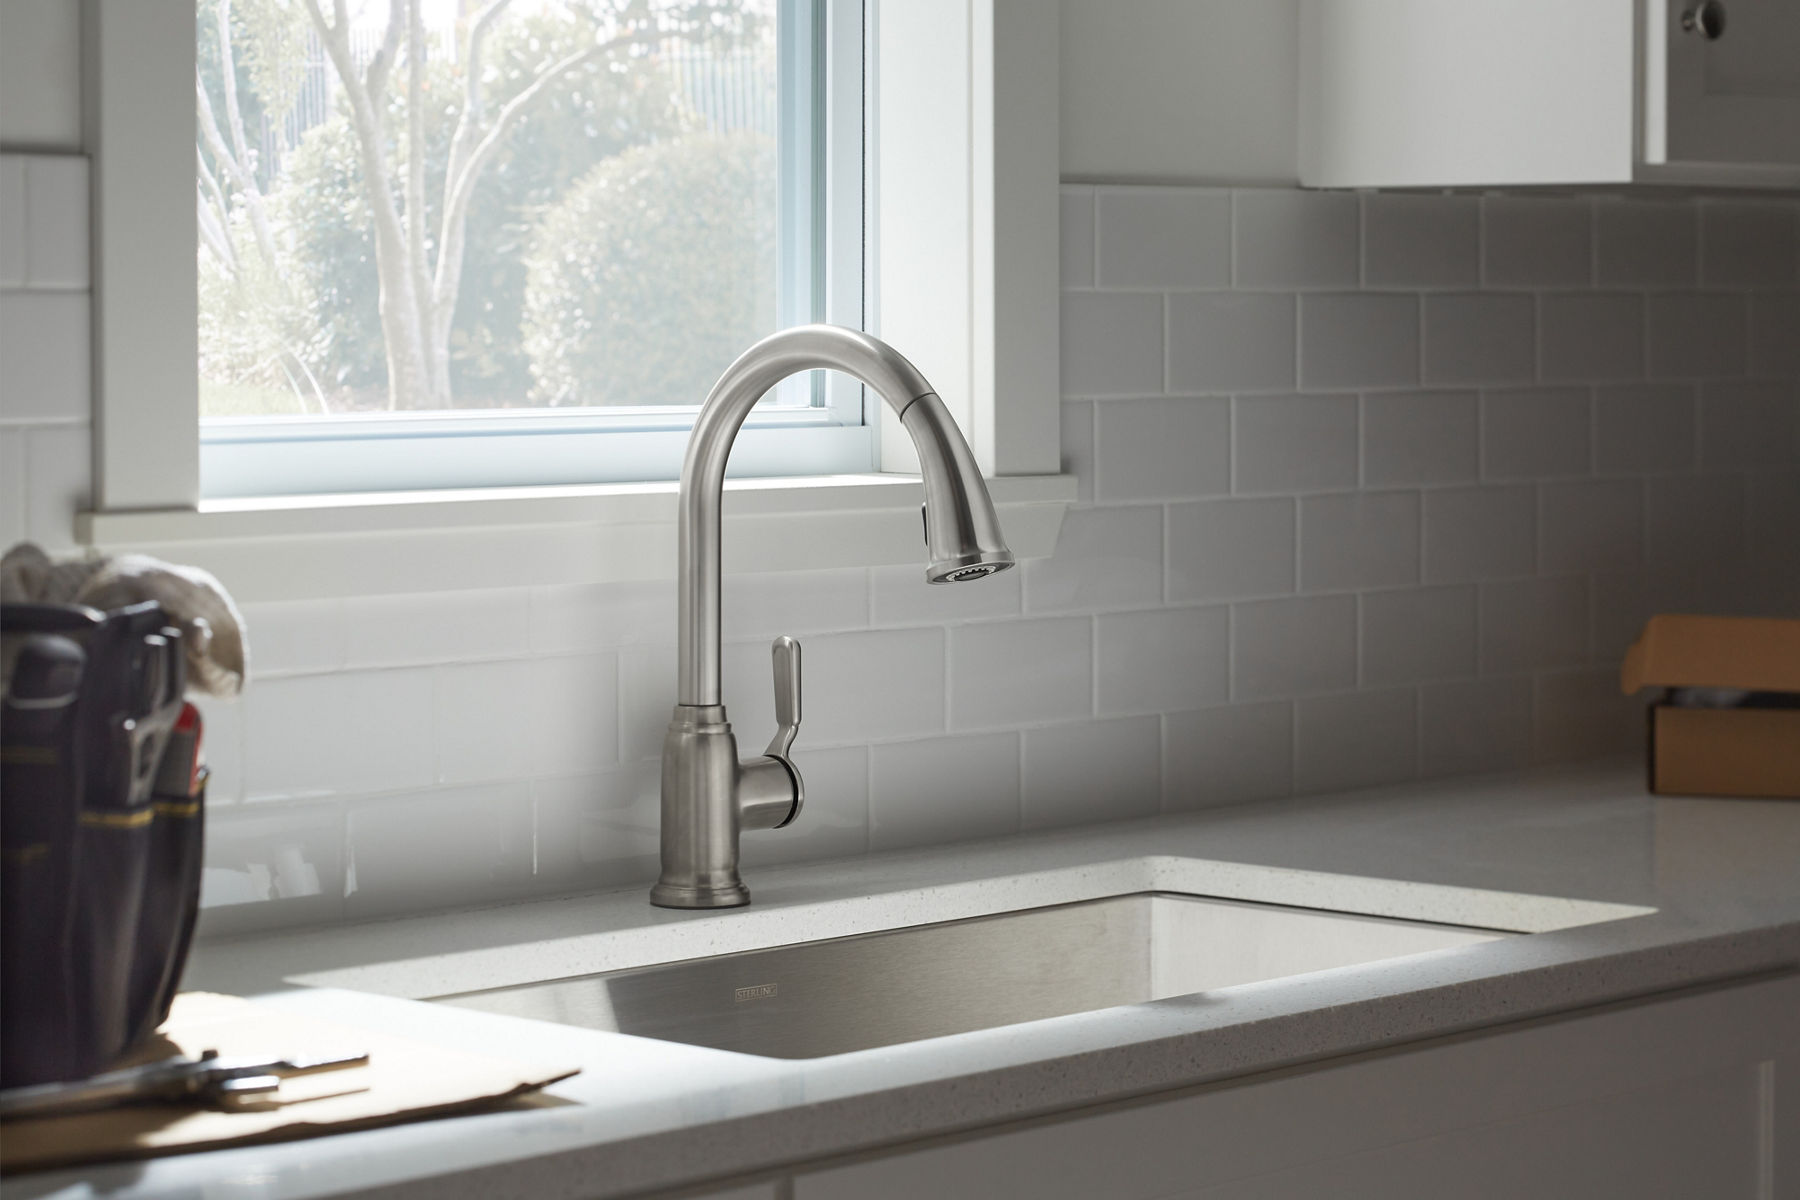 Stainless steel pull-down kitchen faucet on a white counter top with white walls behind it.